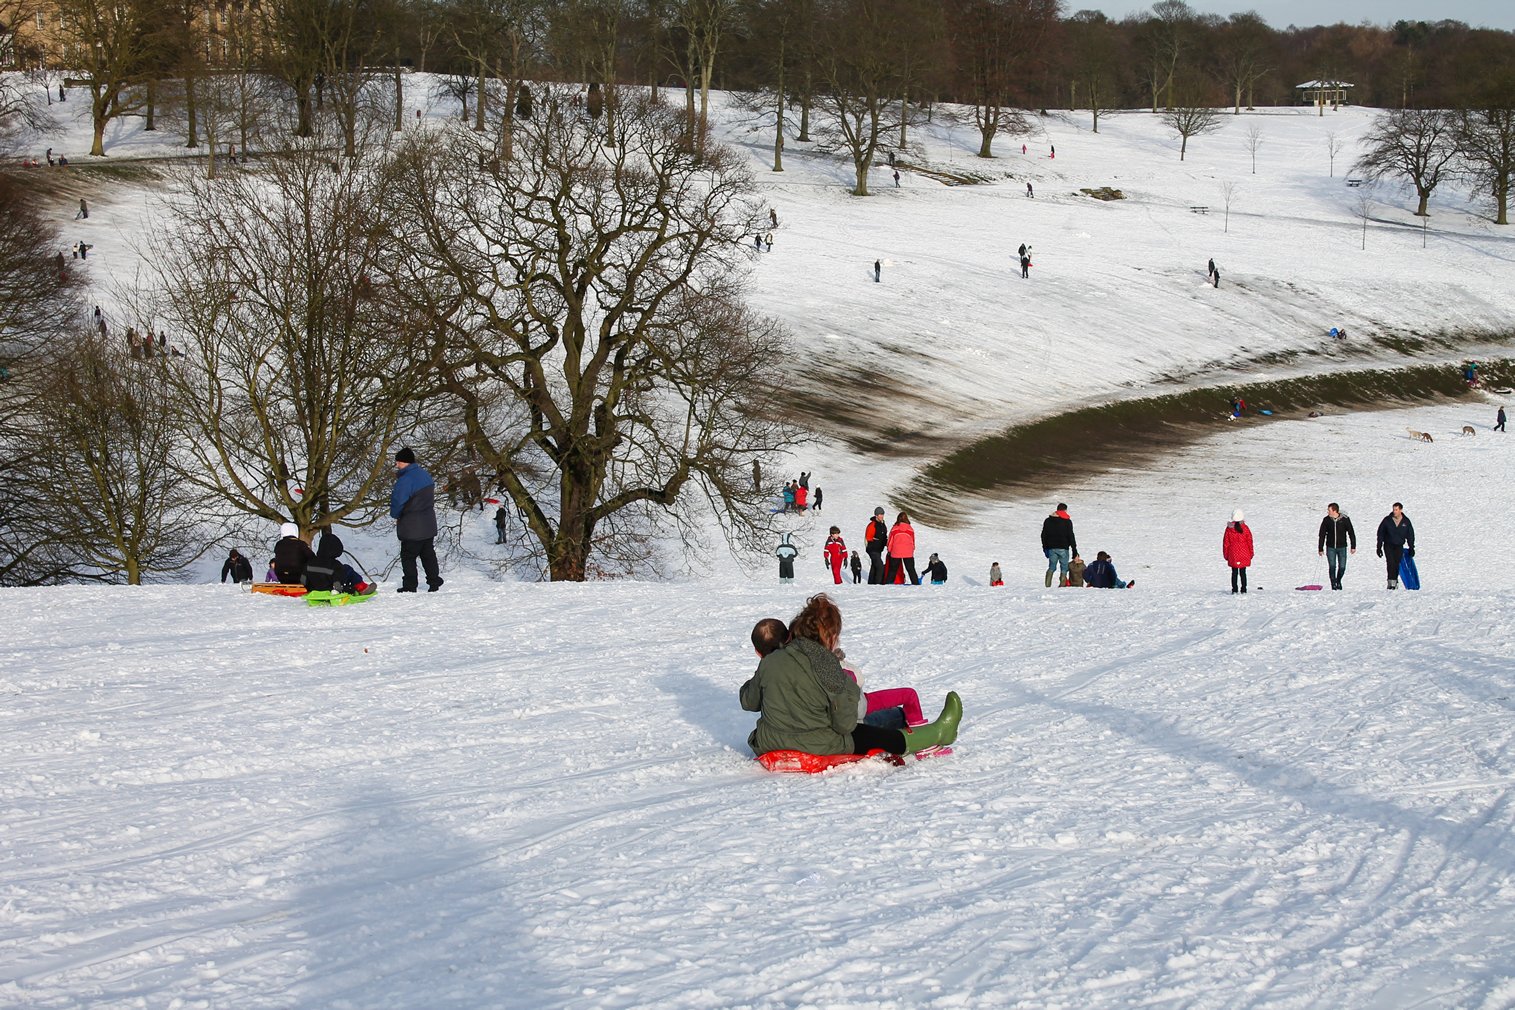 Image name sledging roundhay park the 16 image from the post Cold weather activities in Yorkshire in Yorkshire.com.